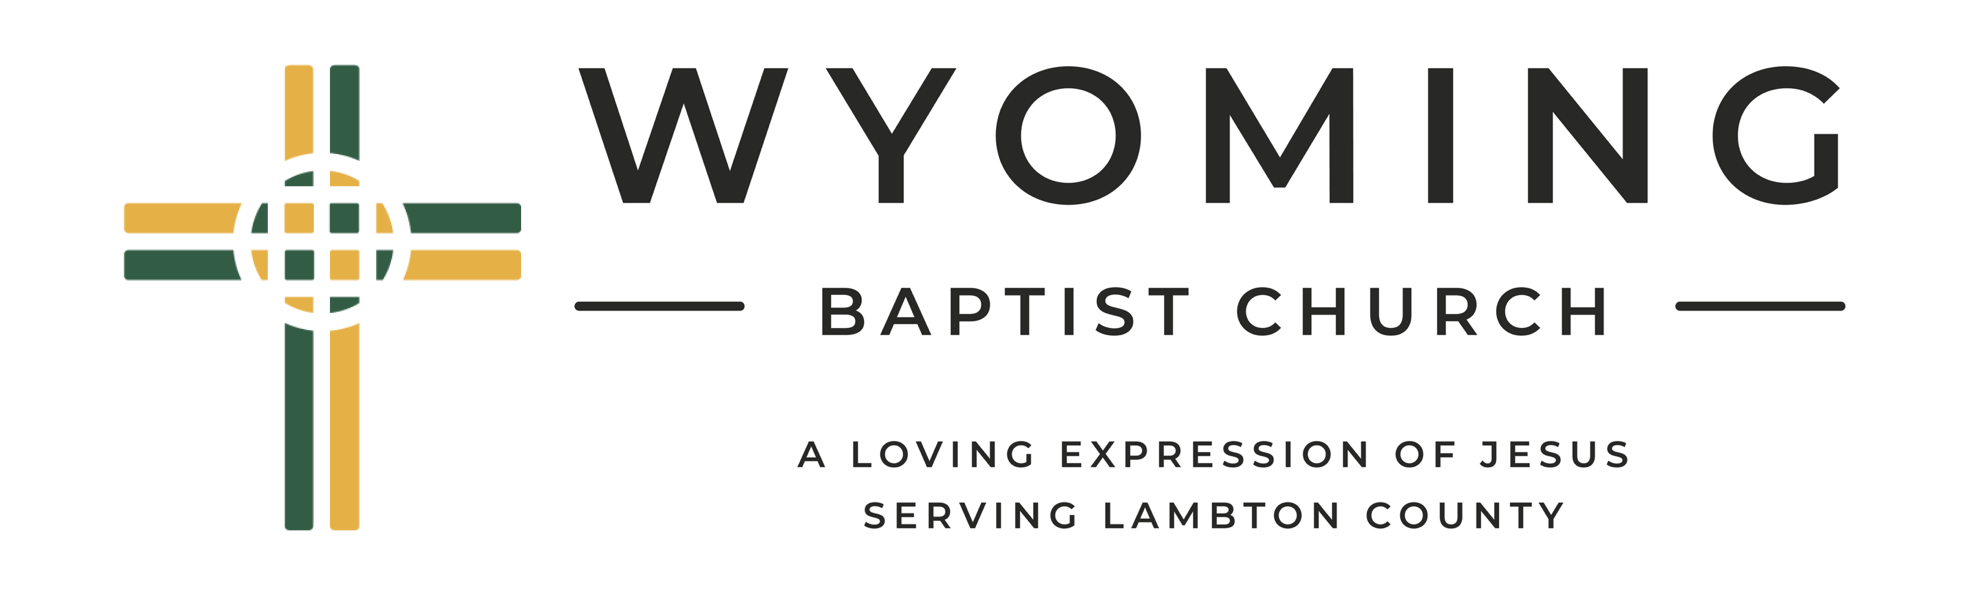 Come and worship with us in Wyoming, Ontario, Canada!